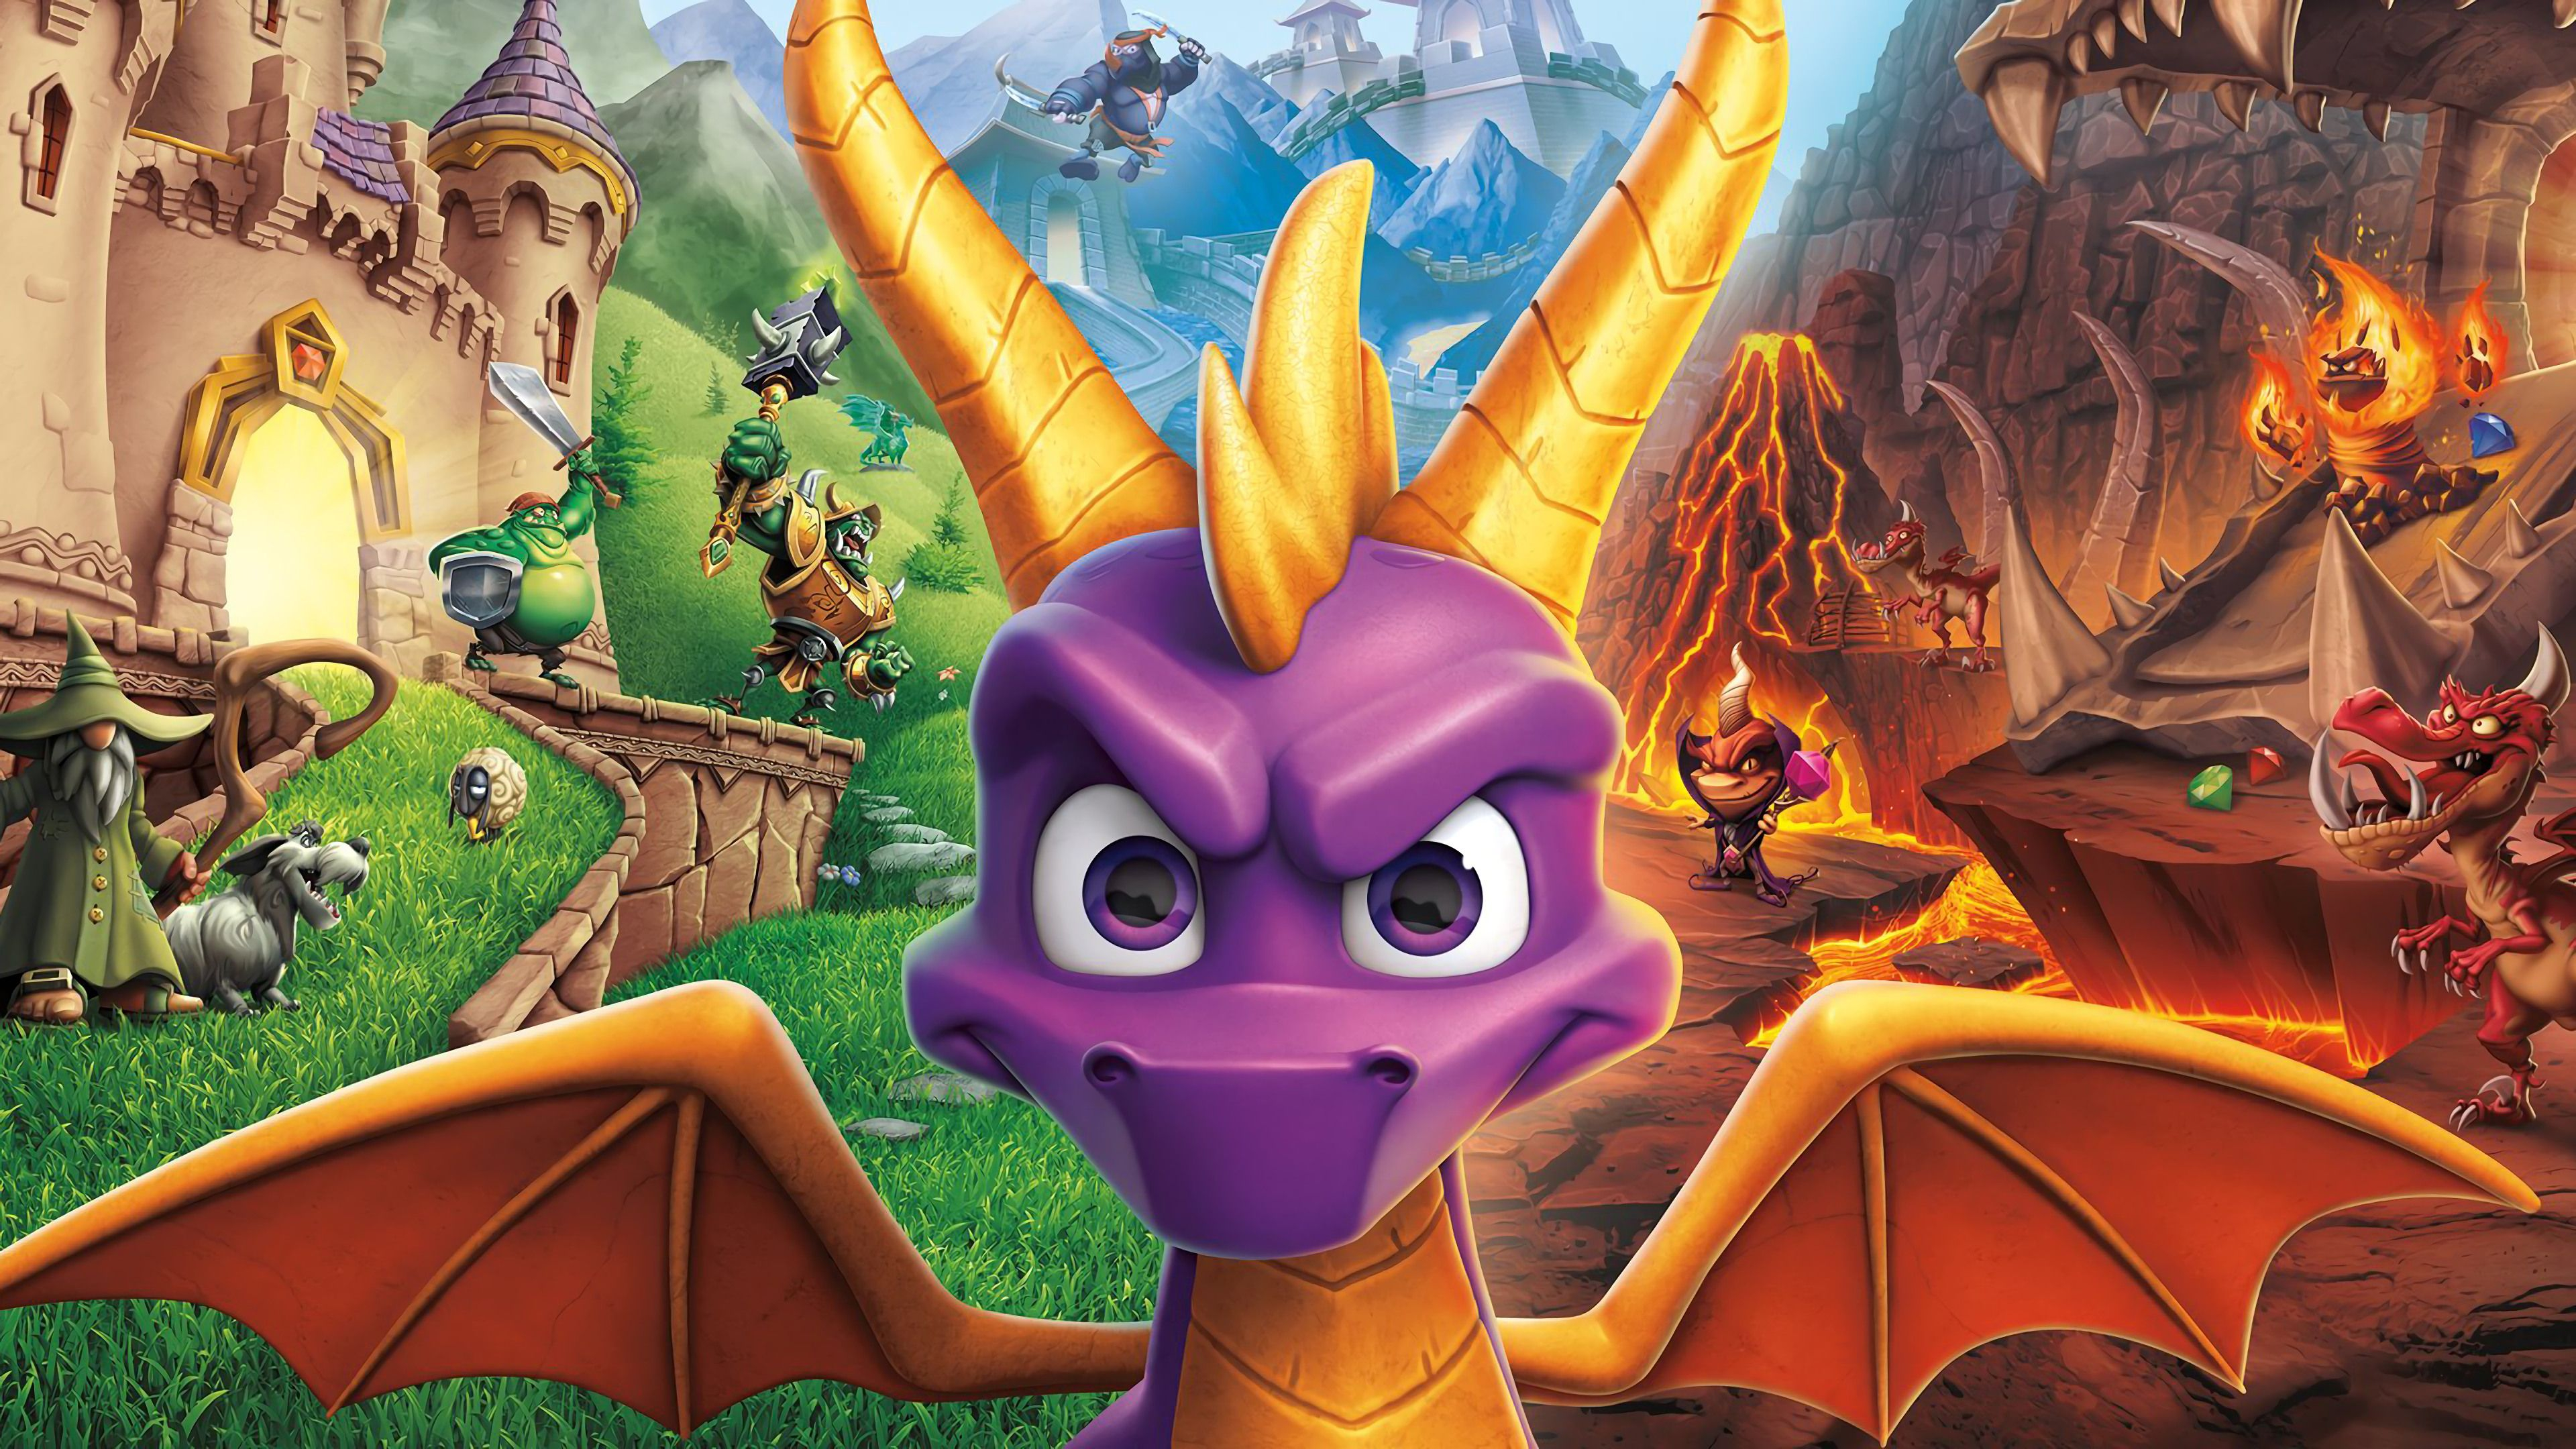 3840x2160 Spyro Reignited Trilogy Wallpapers Top Free Spyro Reignited Trilogy Backgrounds